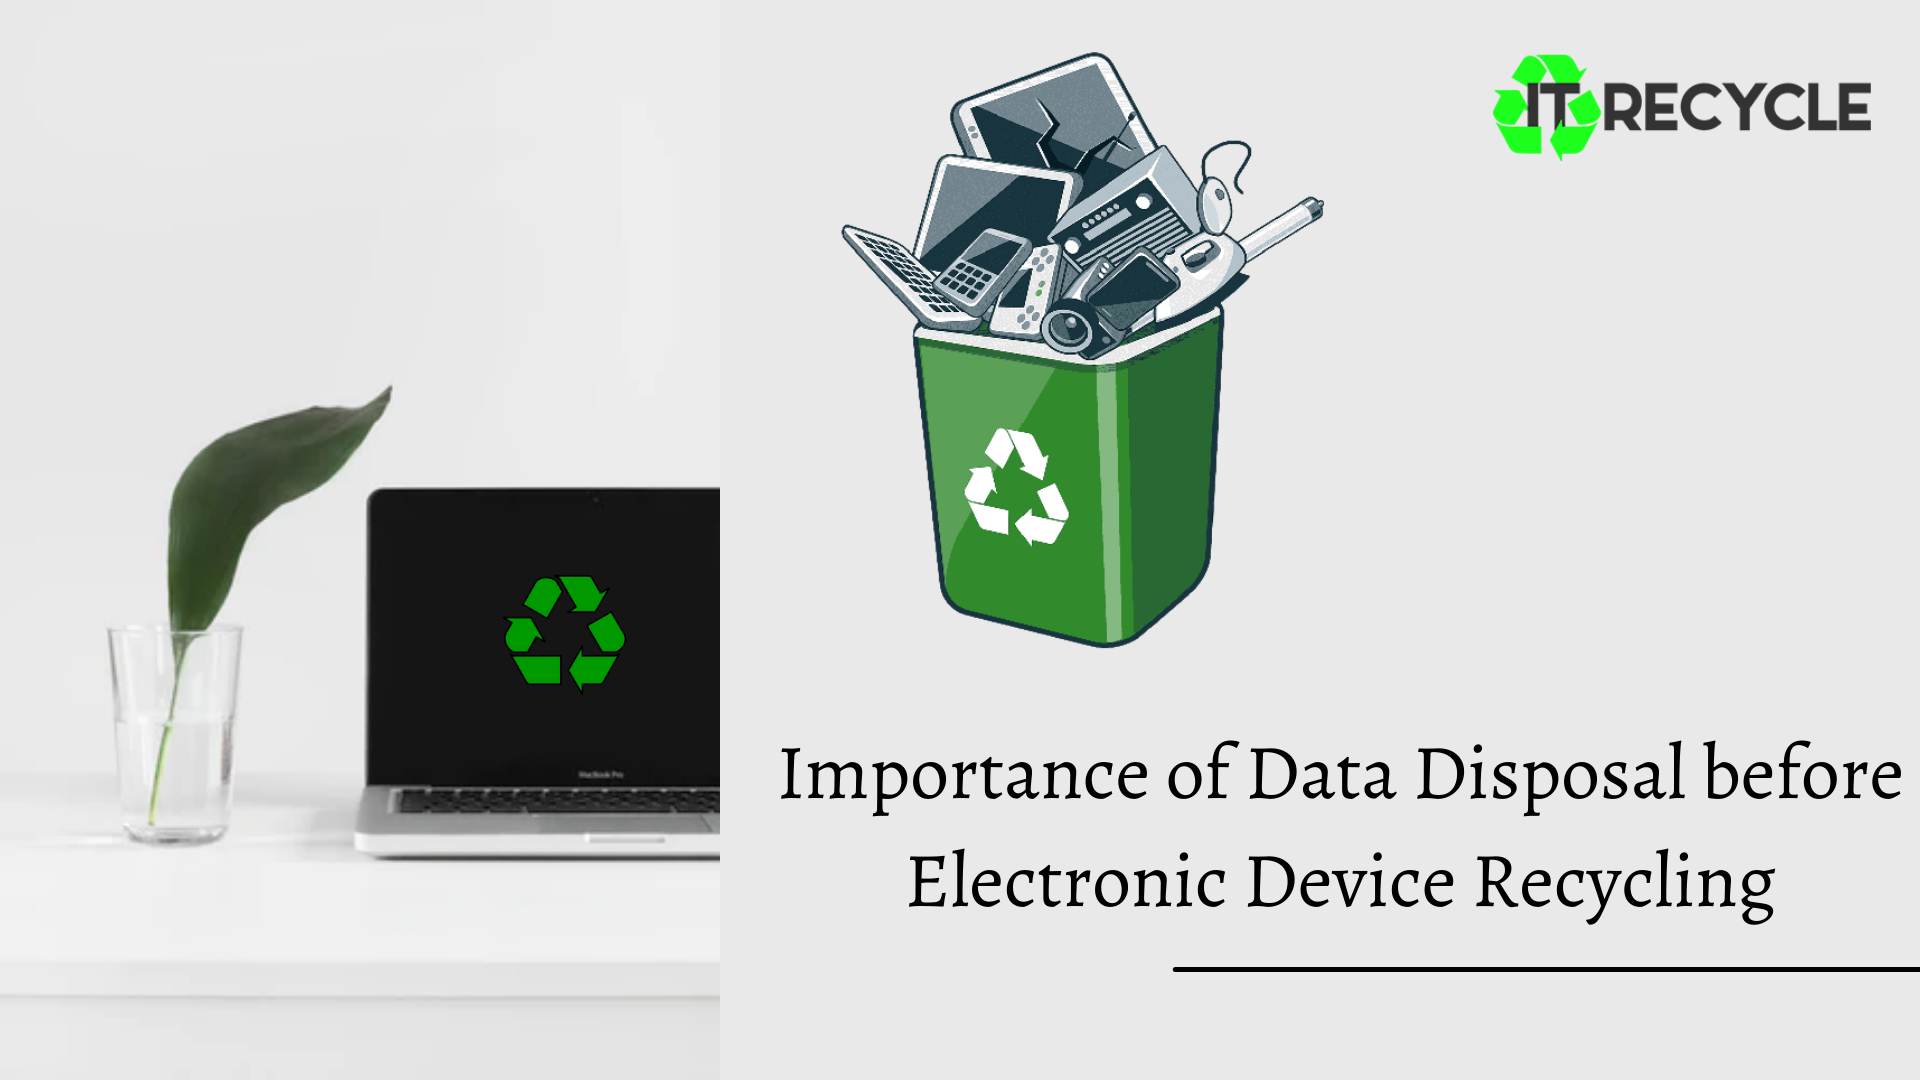 Why should you dispose of data from the devices before sending it for recycling?